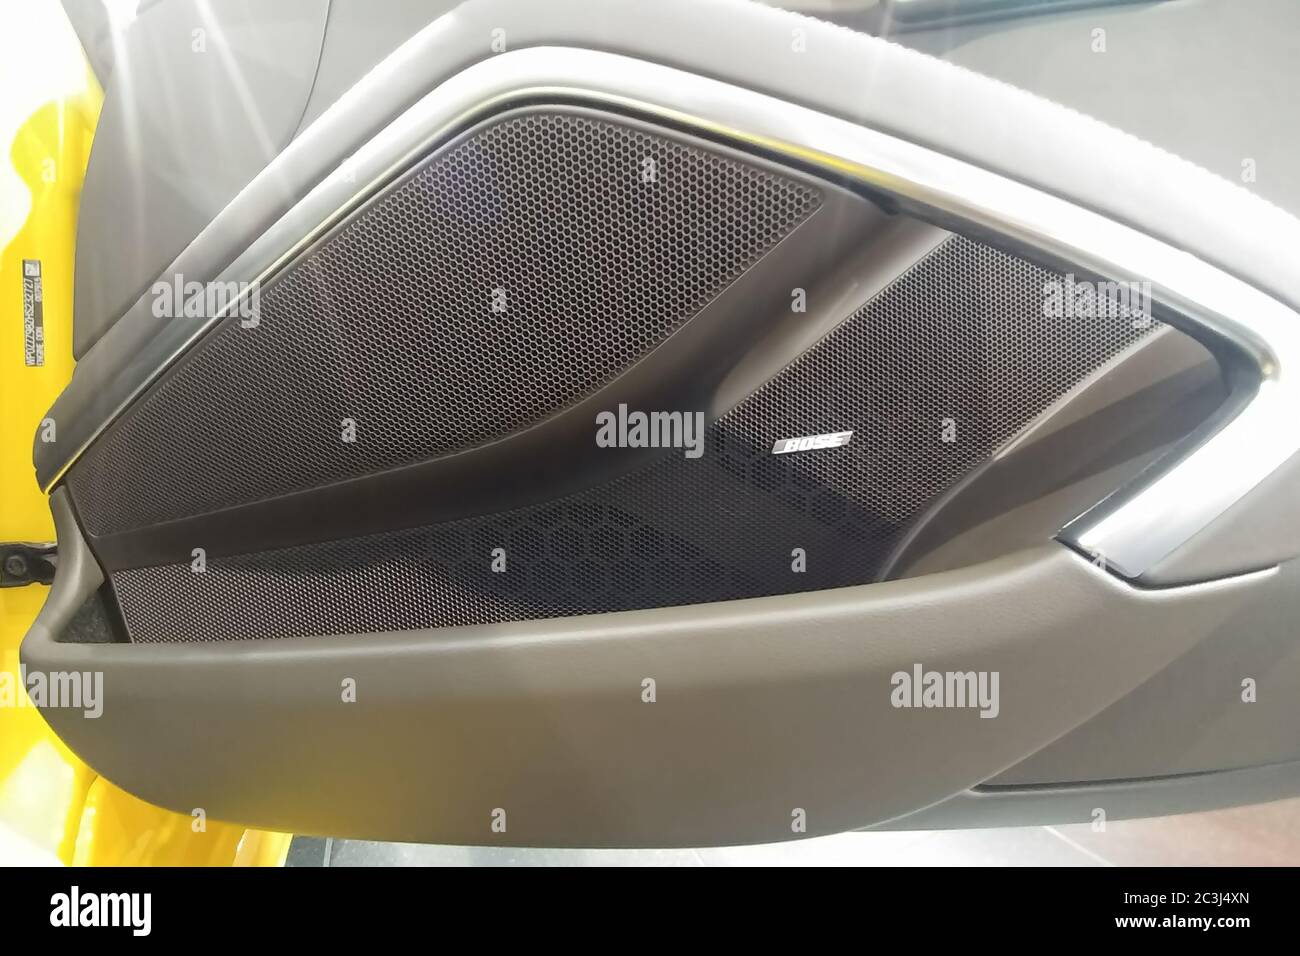 Moscow, Russia - May 07, 2019: Musical speakers of Bose premium audio system  in a Porsche 911 car door. Close-up Stock Photo - Alamy